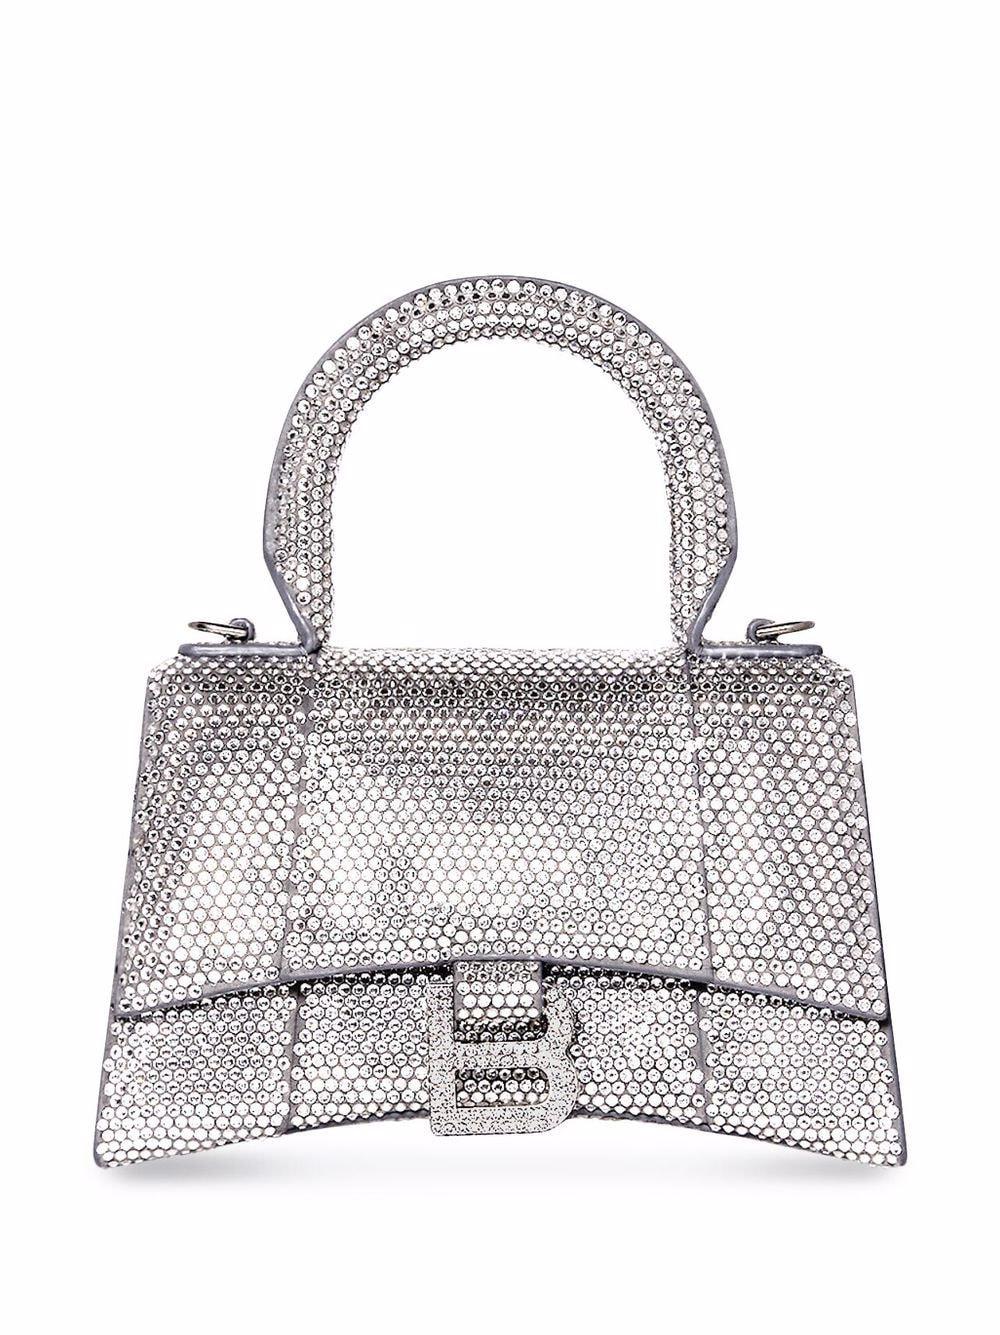 Balenciaga Crystal-embellished Hourglass Tote Bag in White | Lyst